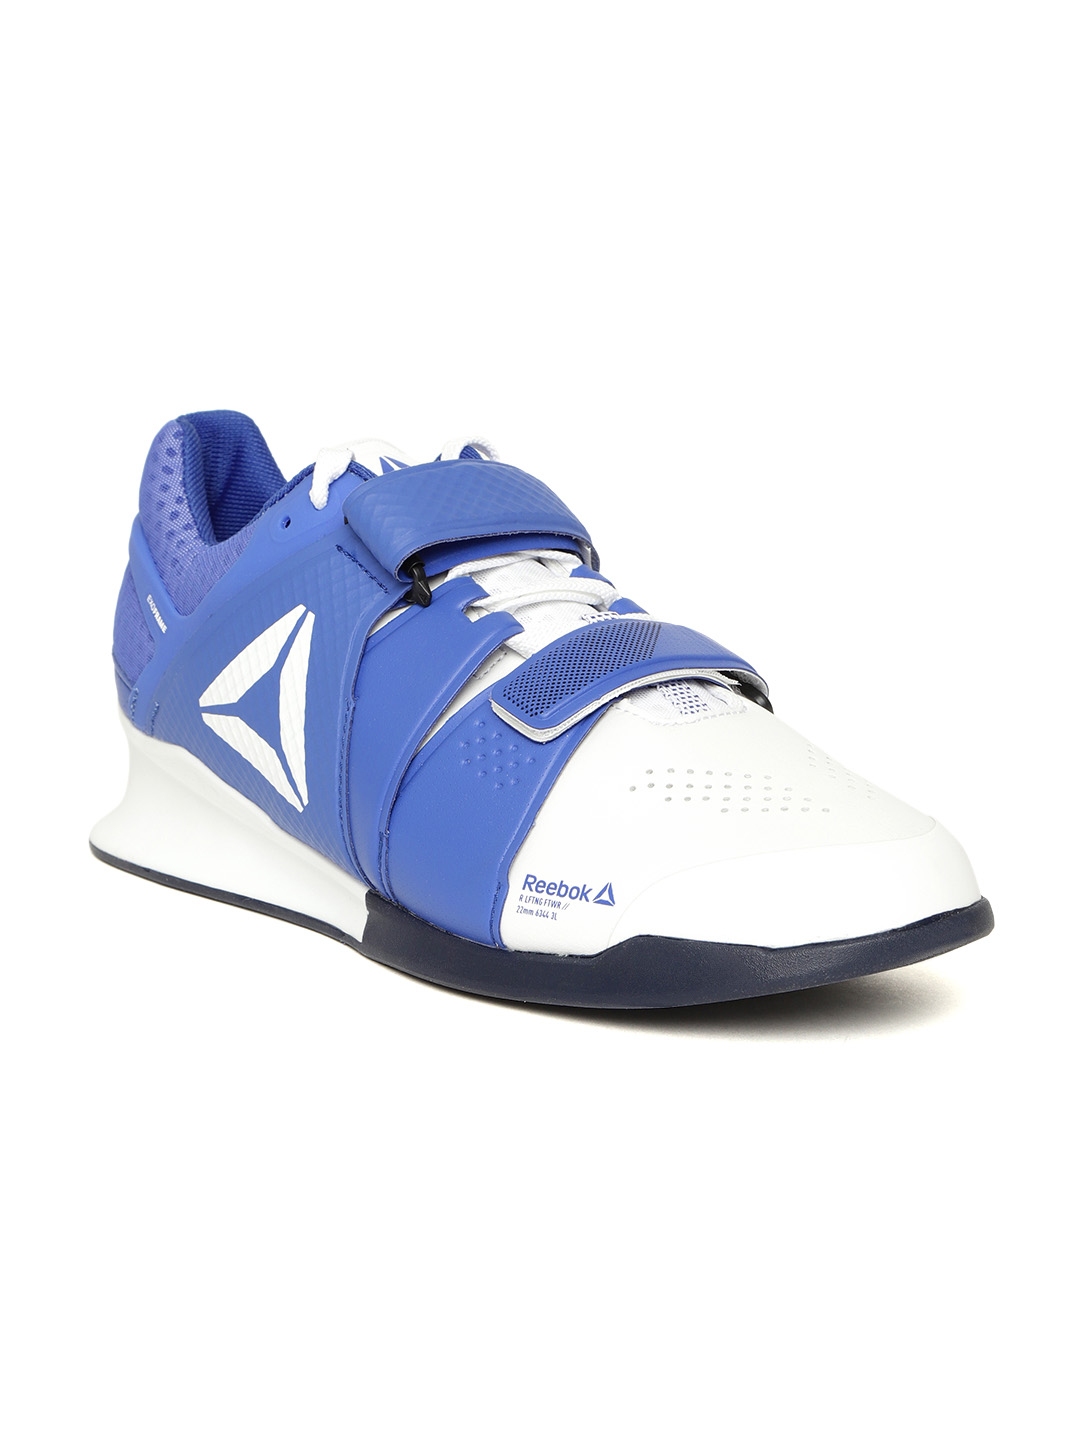 Buy Reebok Blue & White Crossfit Legacy Lifter Colourblocked Training Shoes - Sports Shoes for Men 8496743 | Myntra